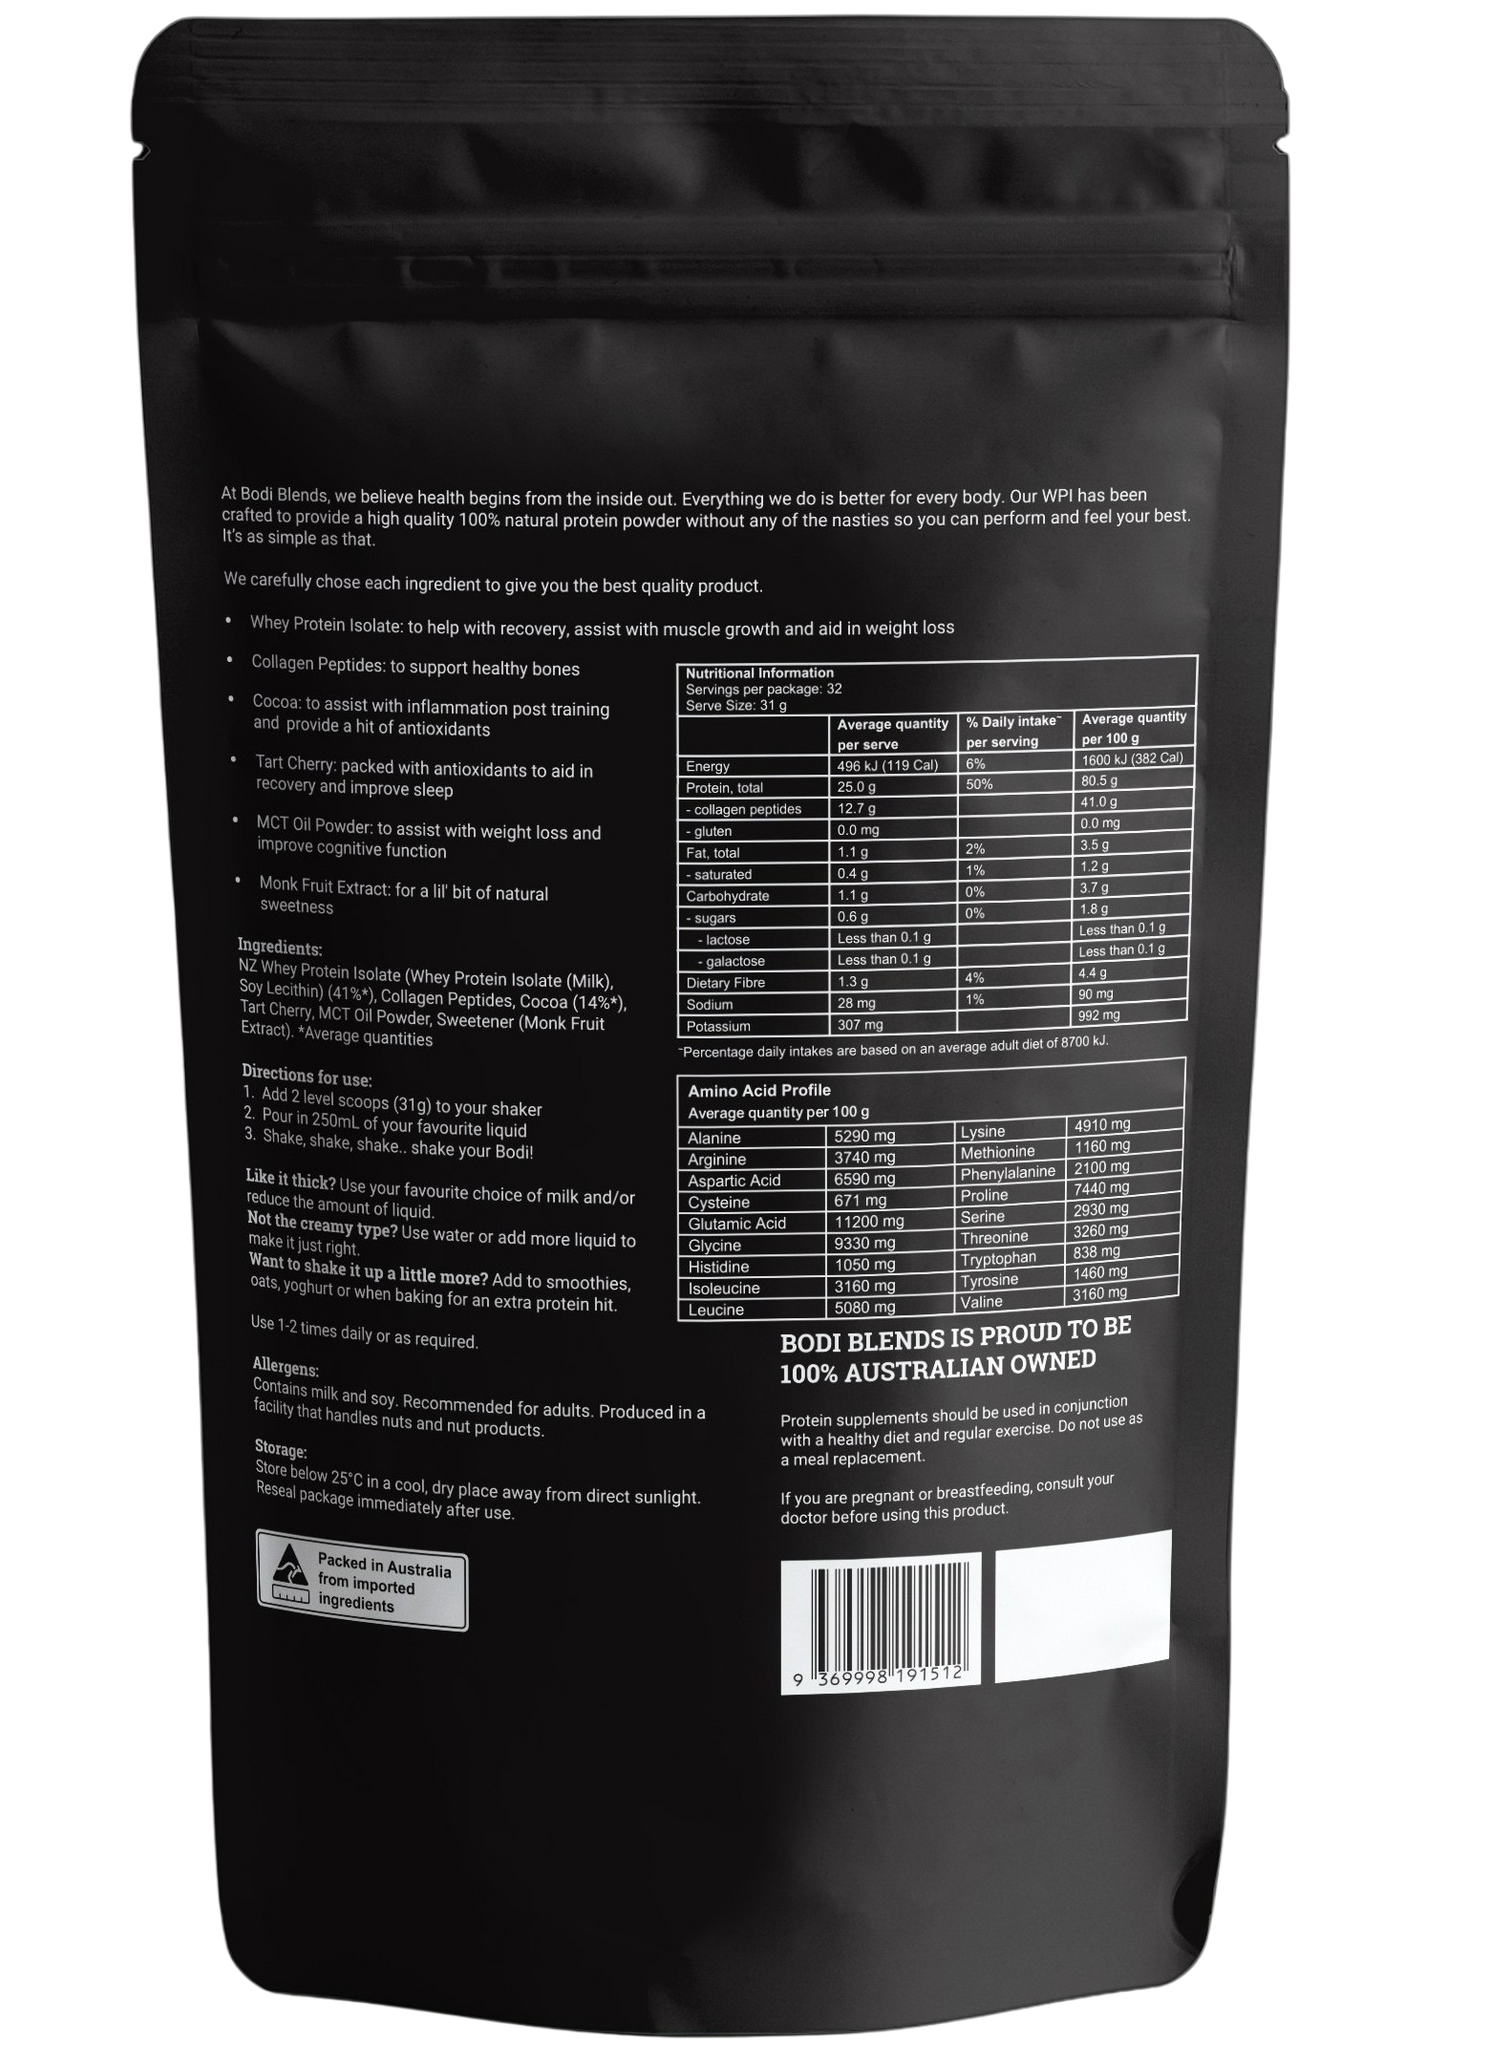 Back of a stand up pouch of chocolate flavoured whey protein isolate powder. The label shows information about the brand, ingredients, ways to use the powder, a nutritional panel and other information like storage, allergies and suggested use. The powder is in a resealable, black plastic stand up pouch.